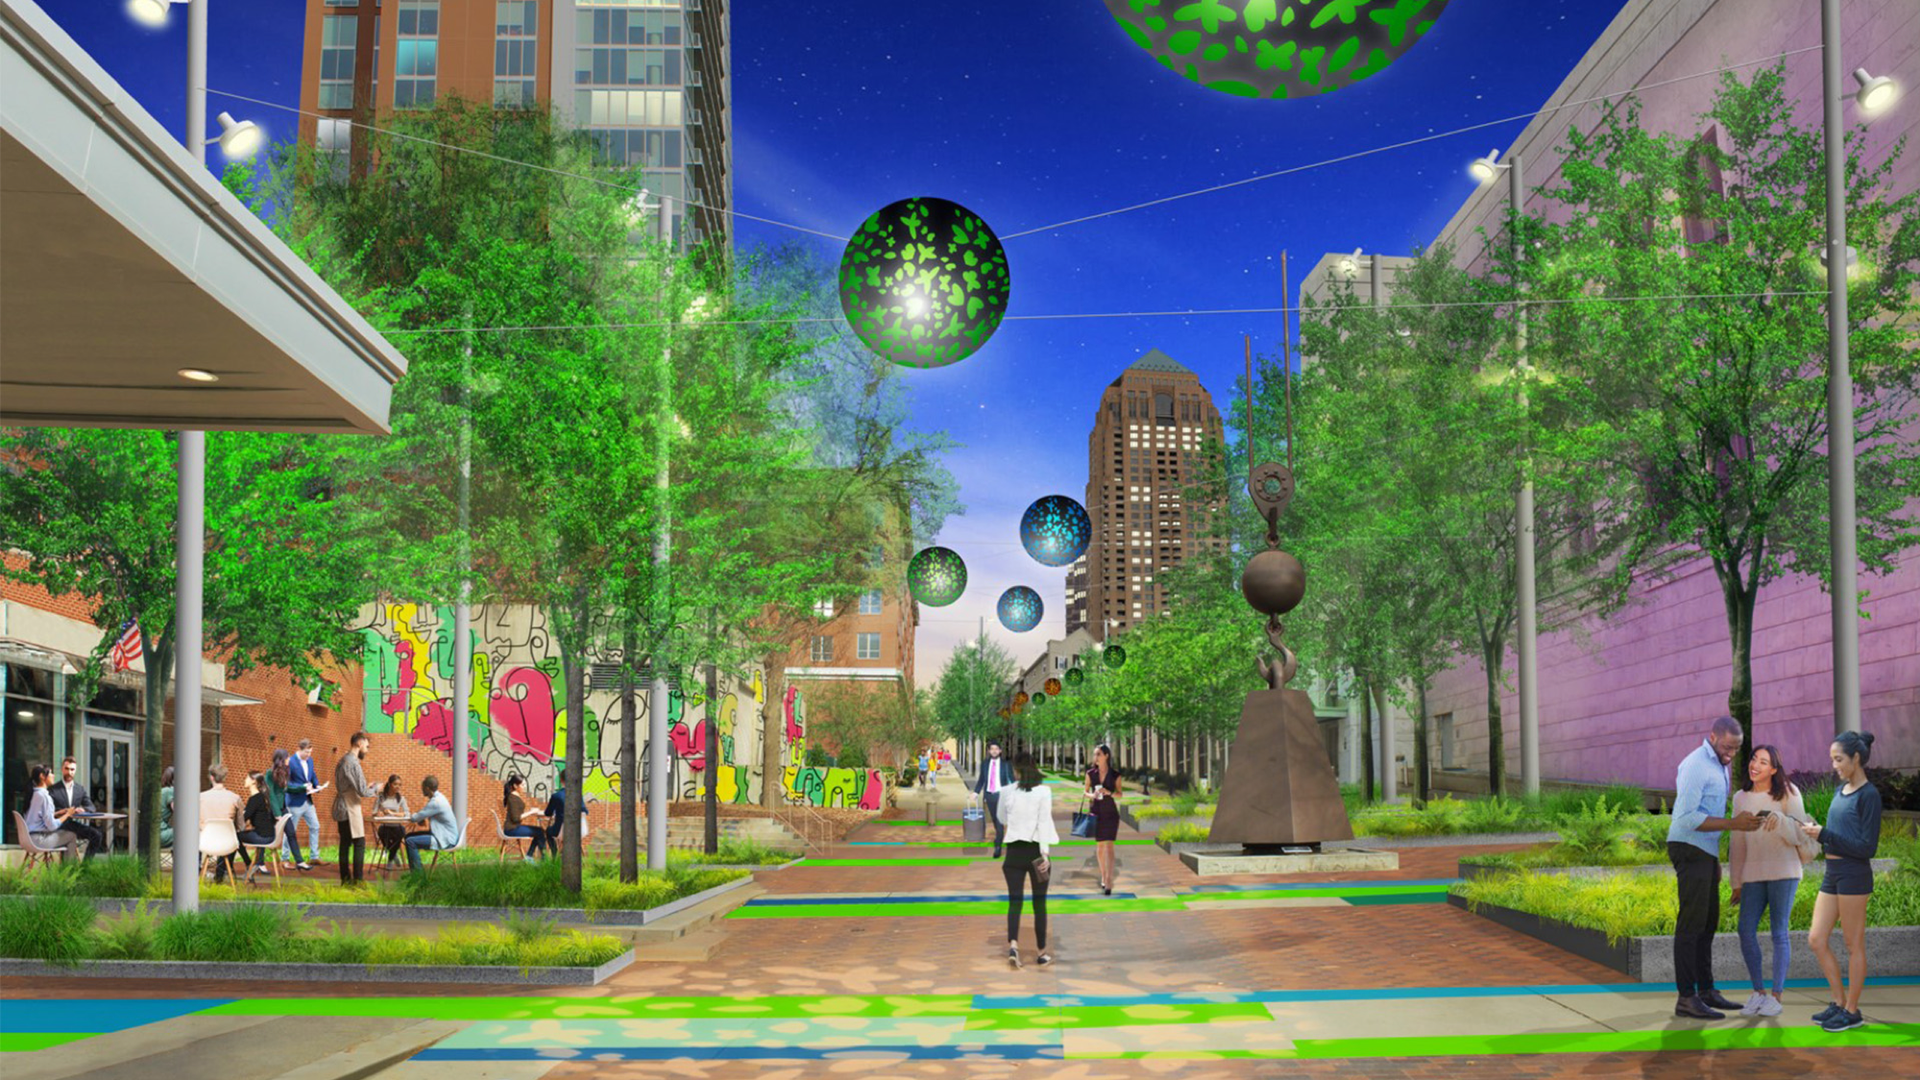 A rendering of a colorful paved pedestrian promenade in an urban setting with trees and green globes suspended overhead